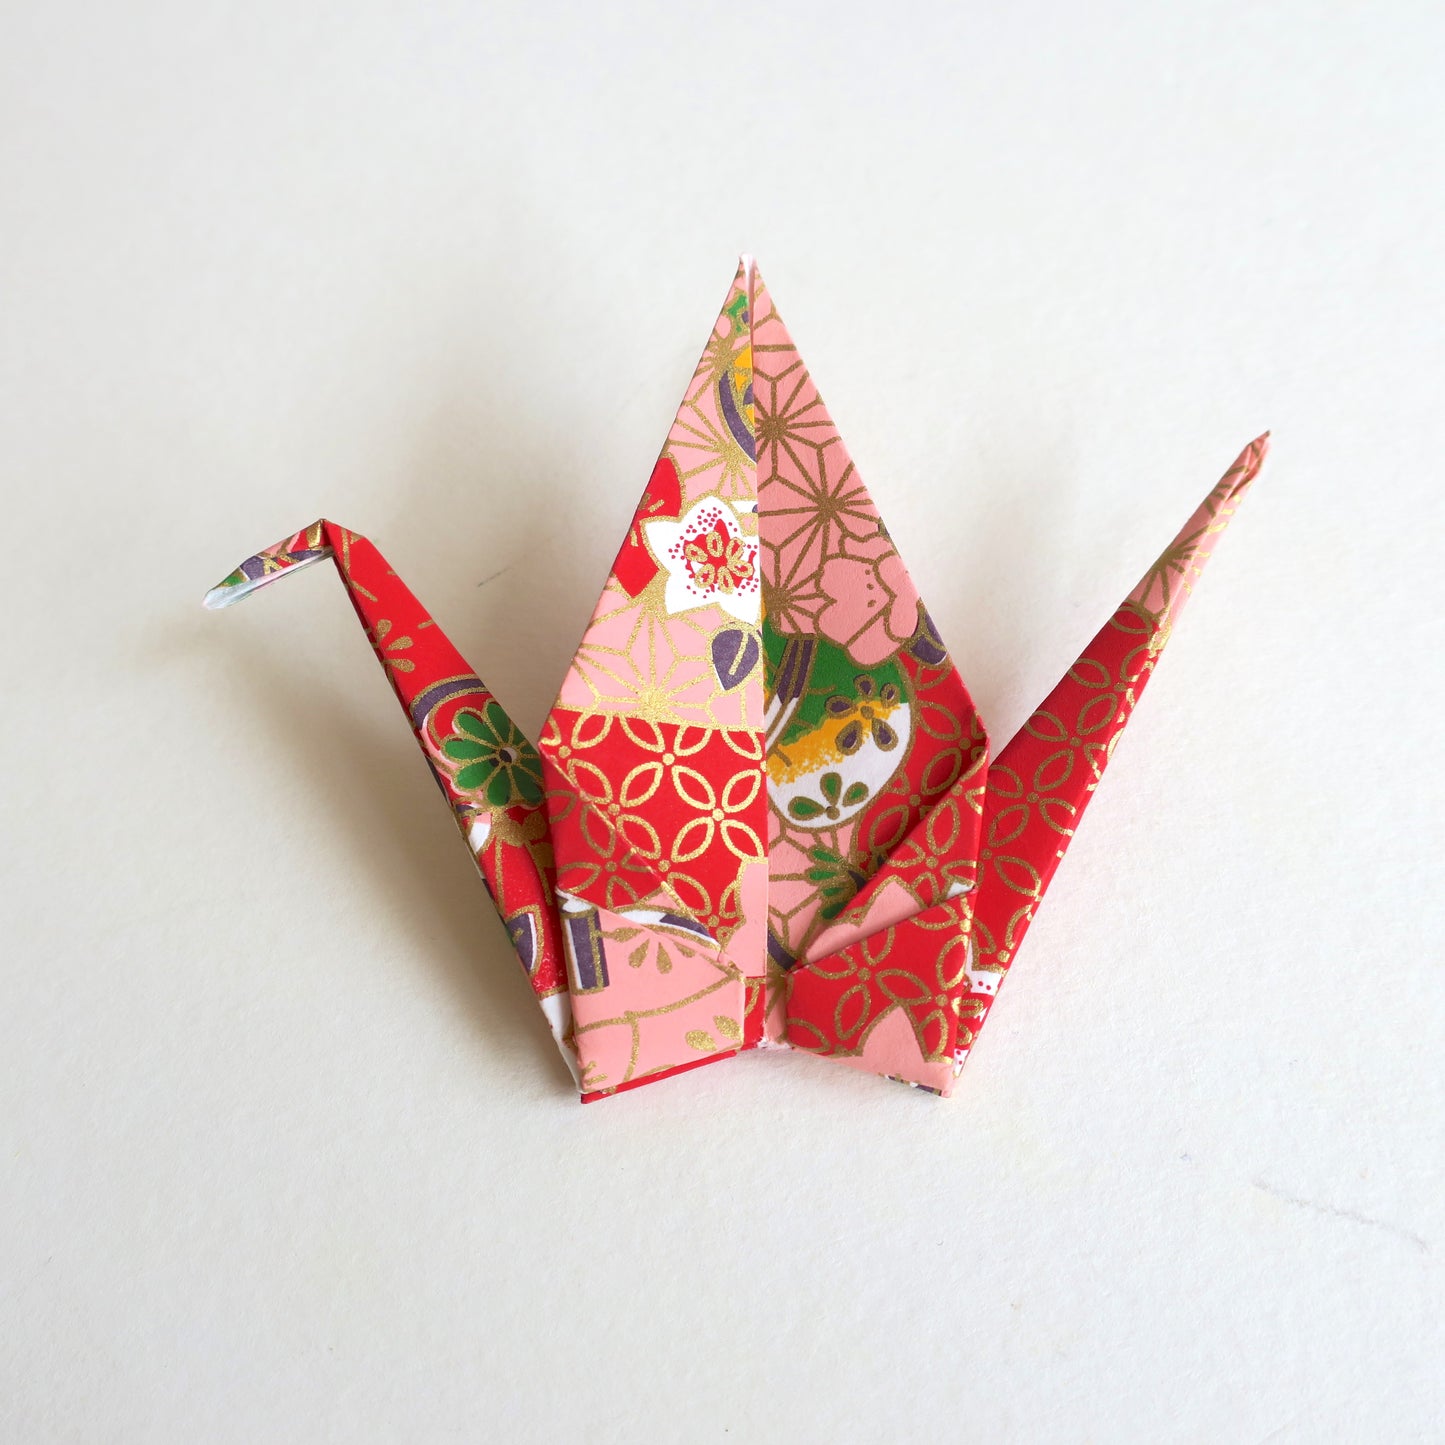 Pack of 10 & 50 & 100 Origami Cranes - Origami Decorations - Lavender Home London